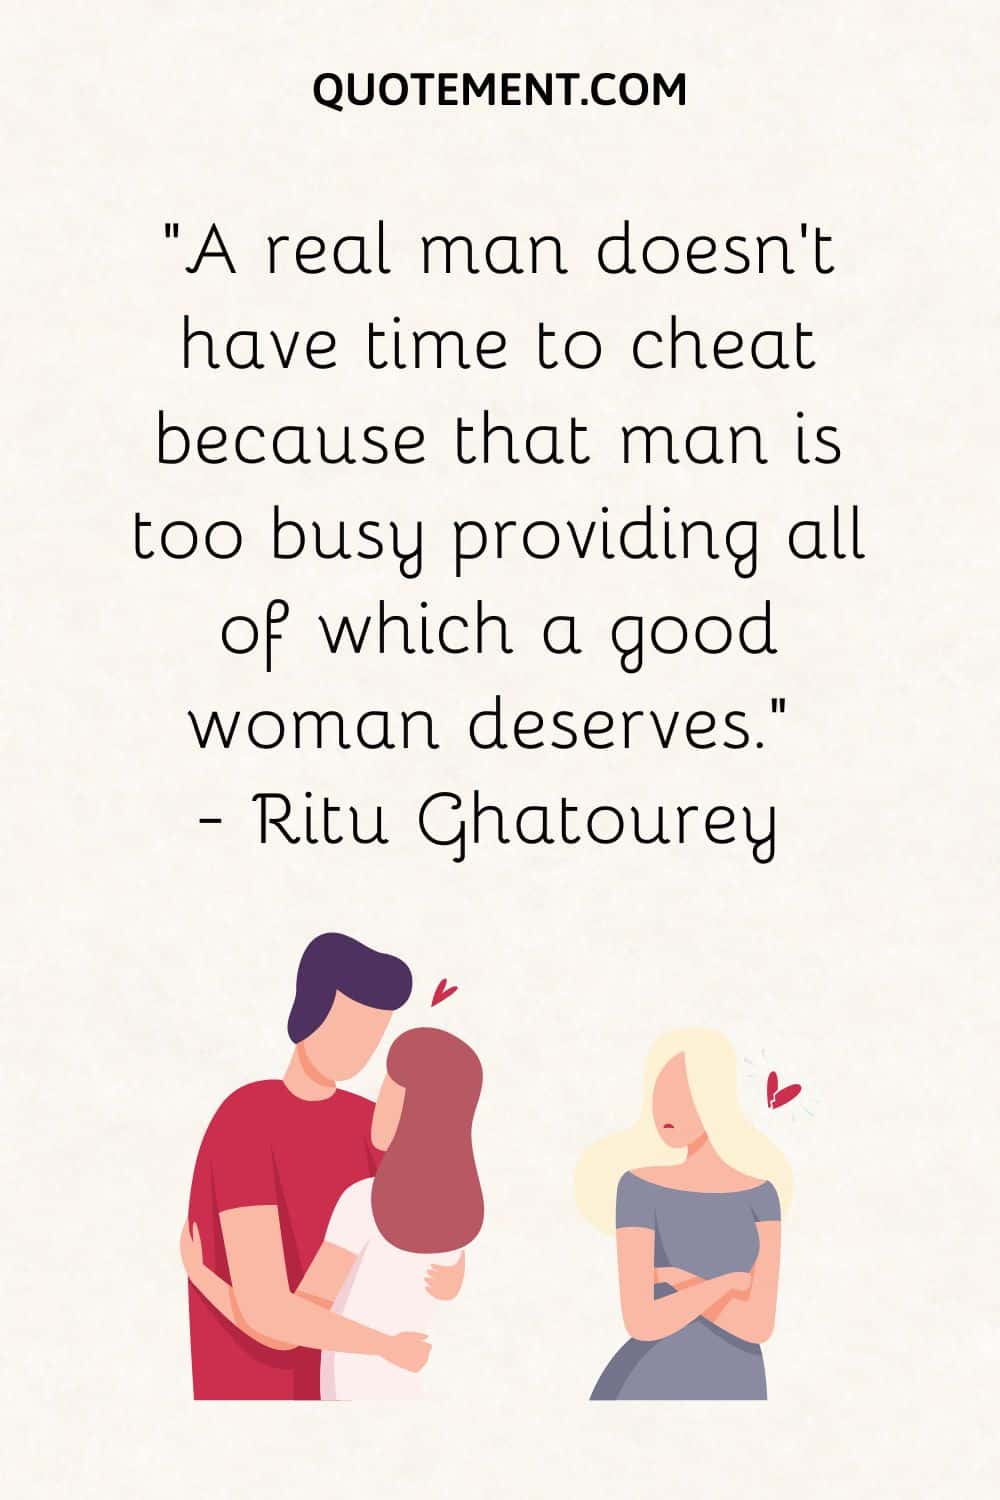 A real man doesn’t have time to cheat because that man is too busy providing all of which a good woman deserves